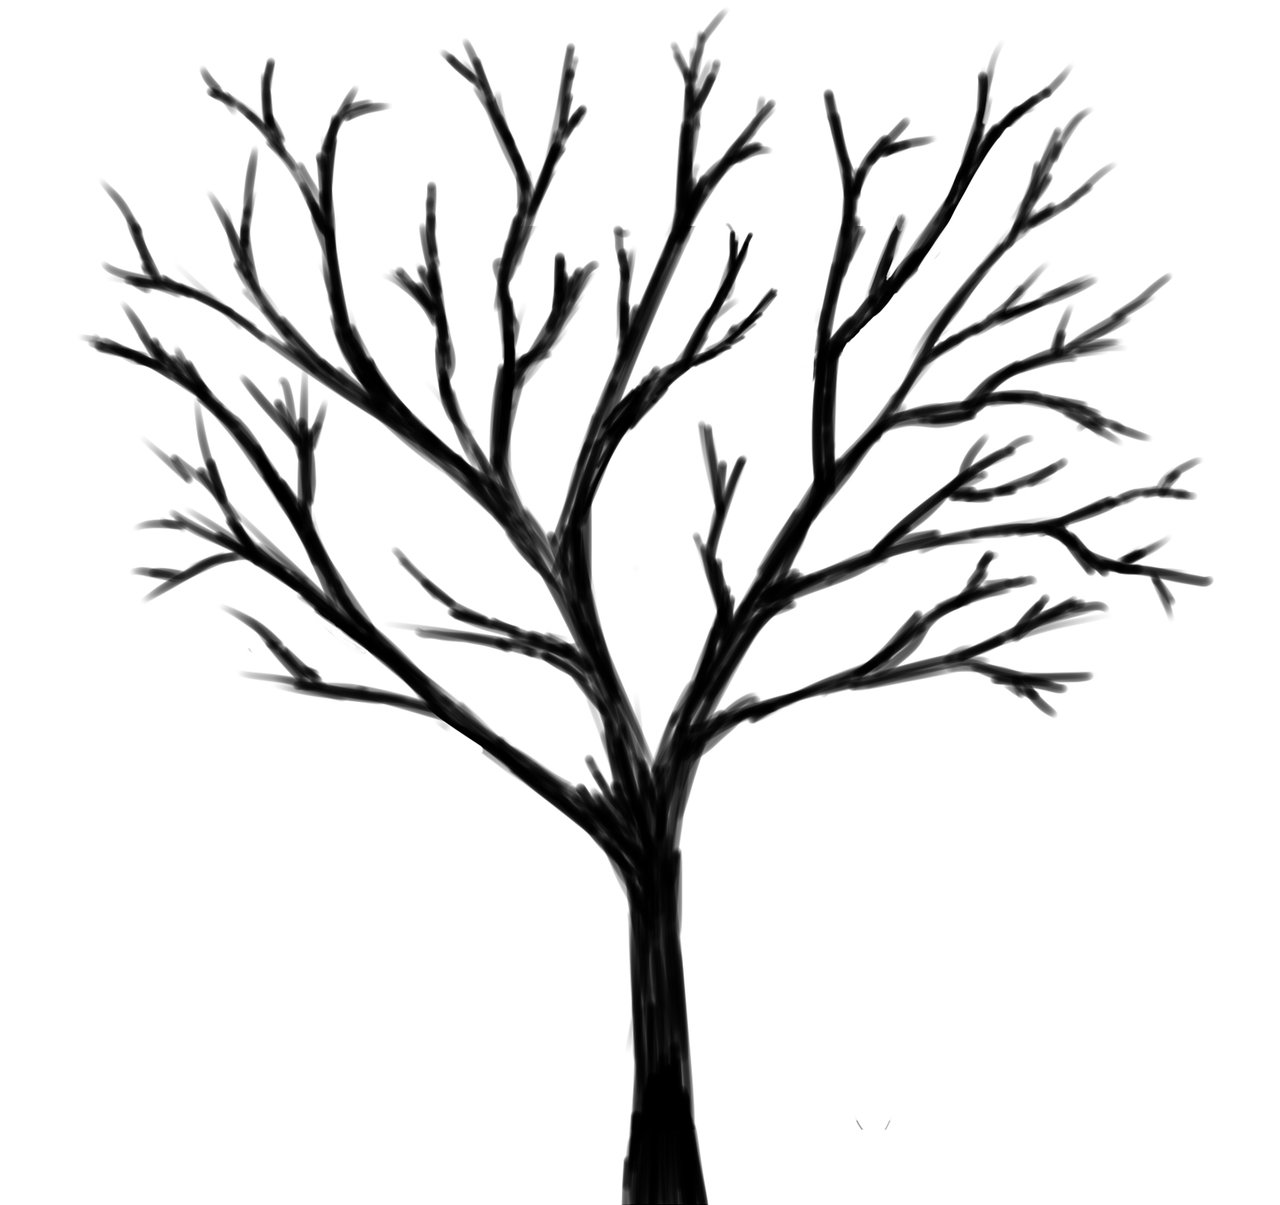 Lone Black Tree by SkullCroos on Clipart library